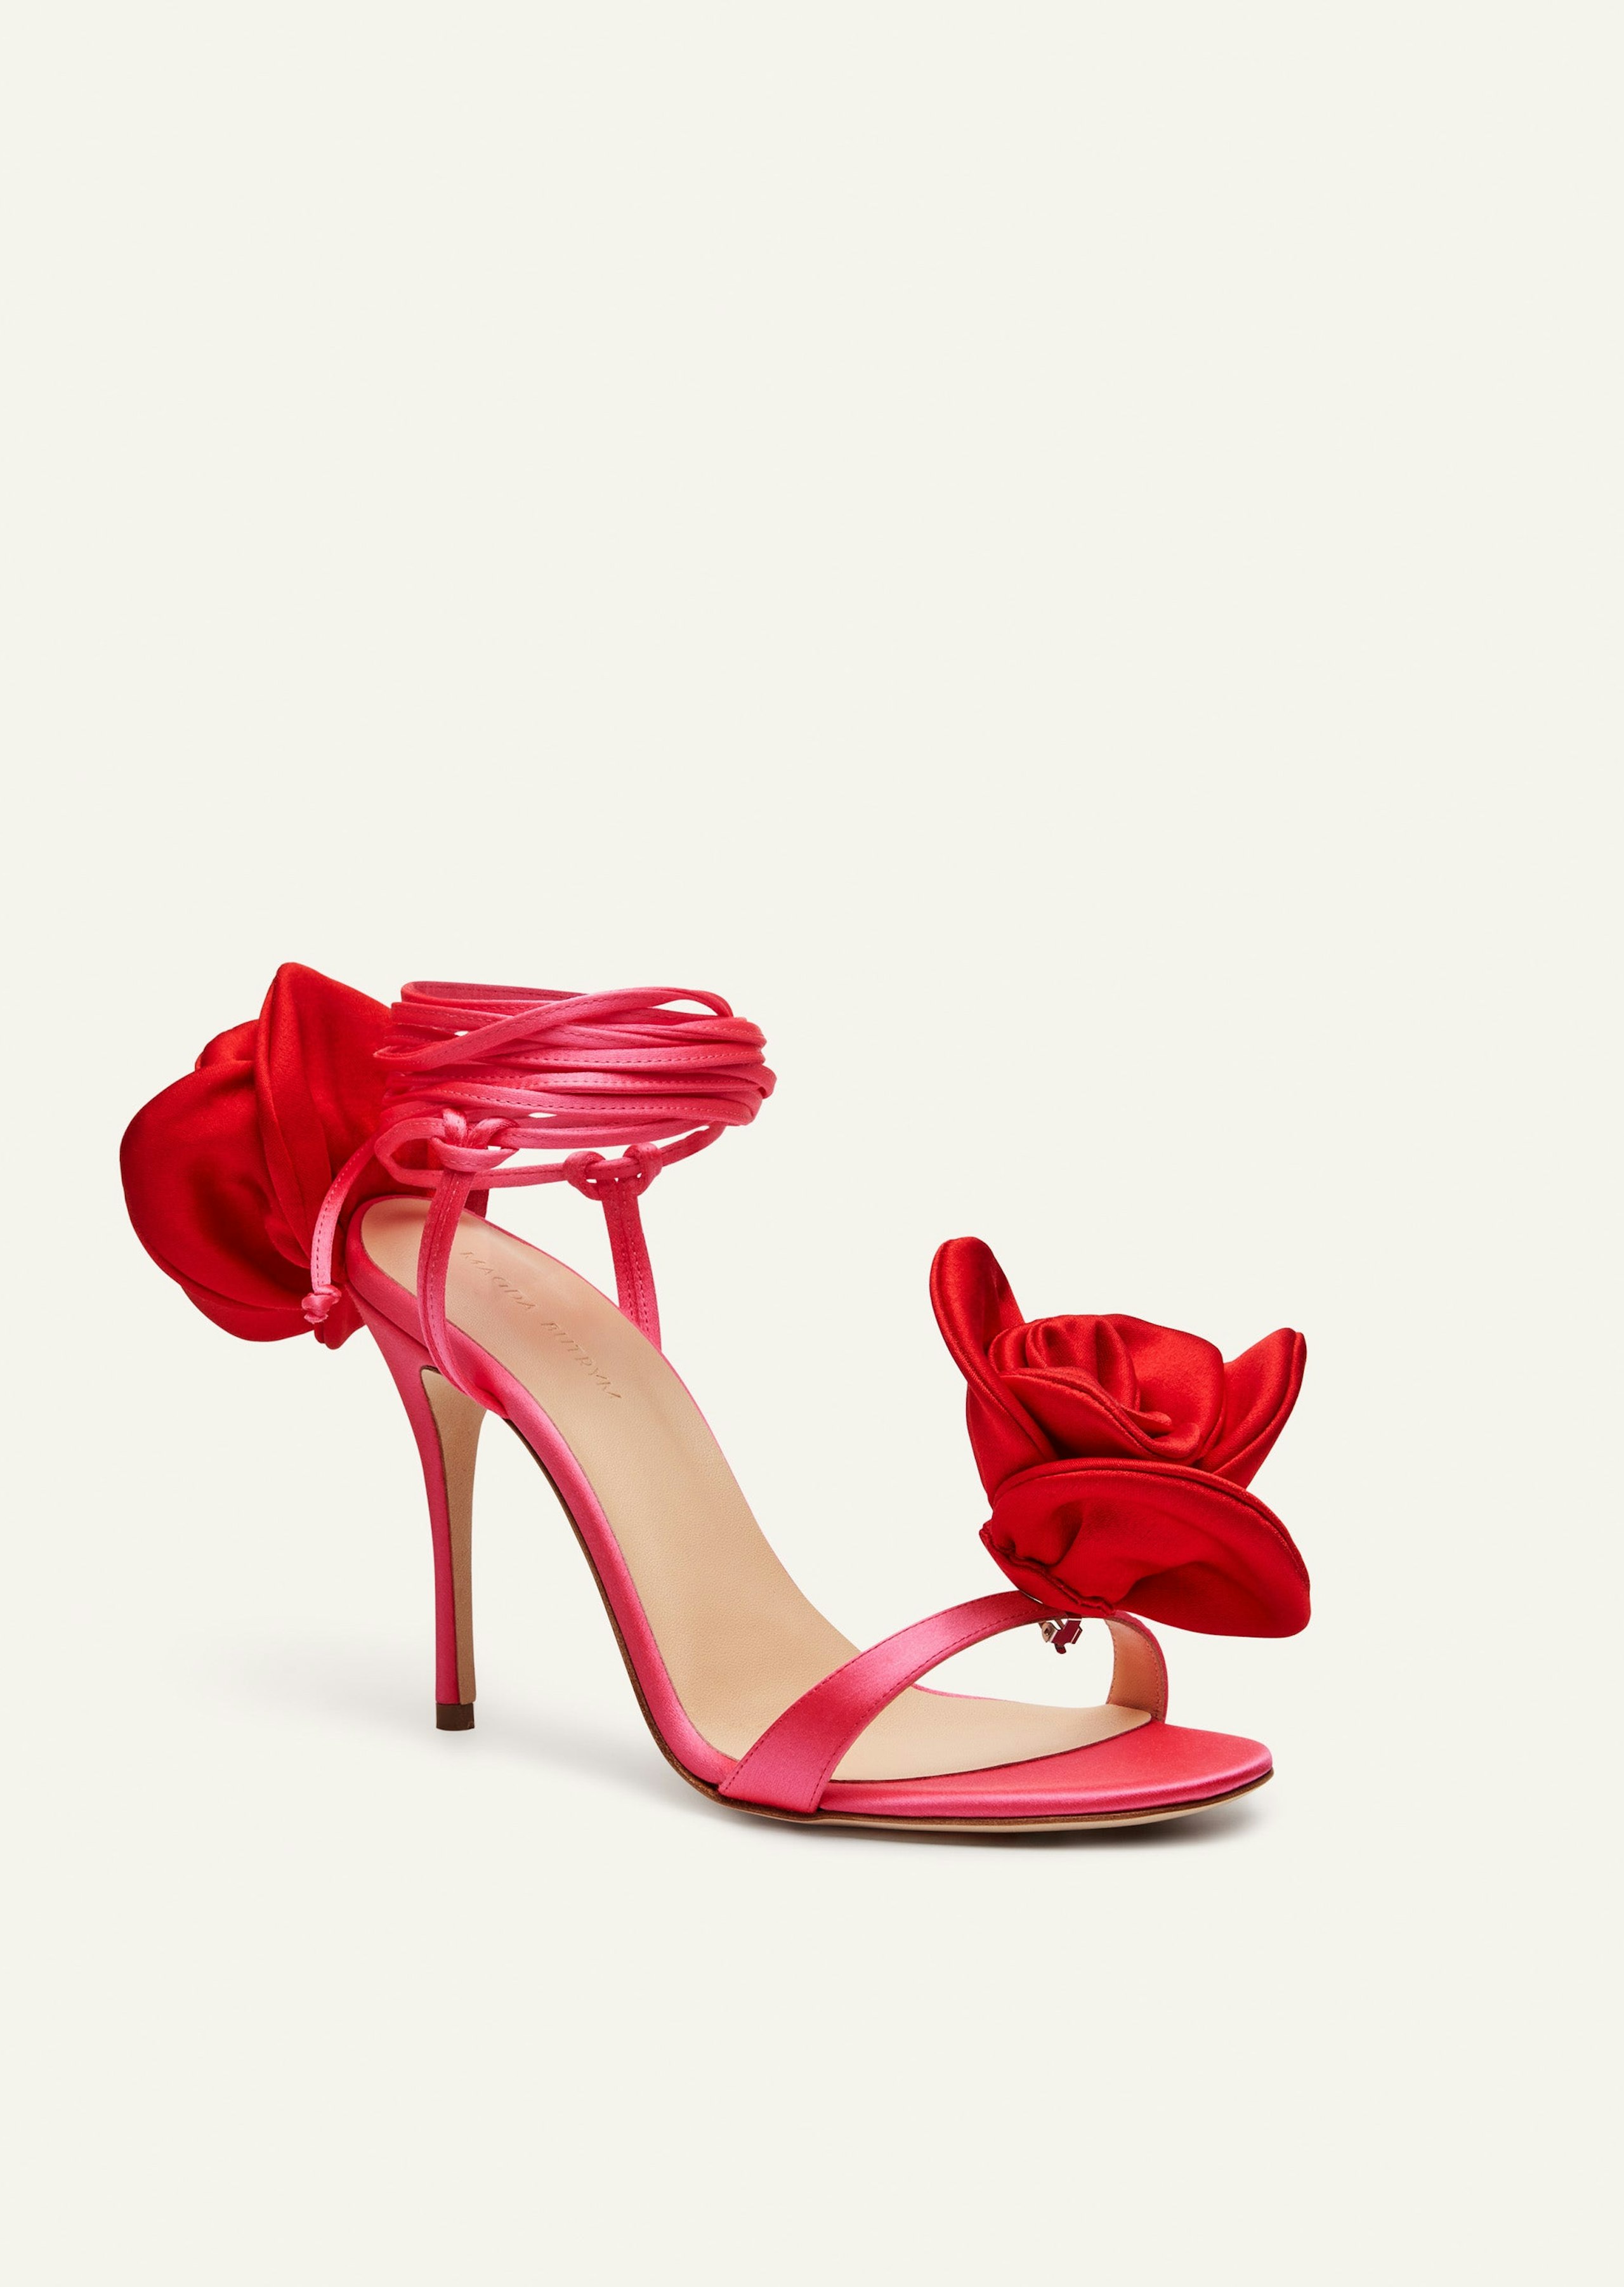 RE23 FLOWER SHOES FUXIA SATIN RED FLOWER